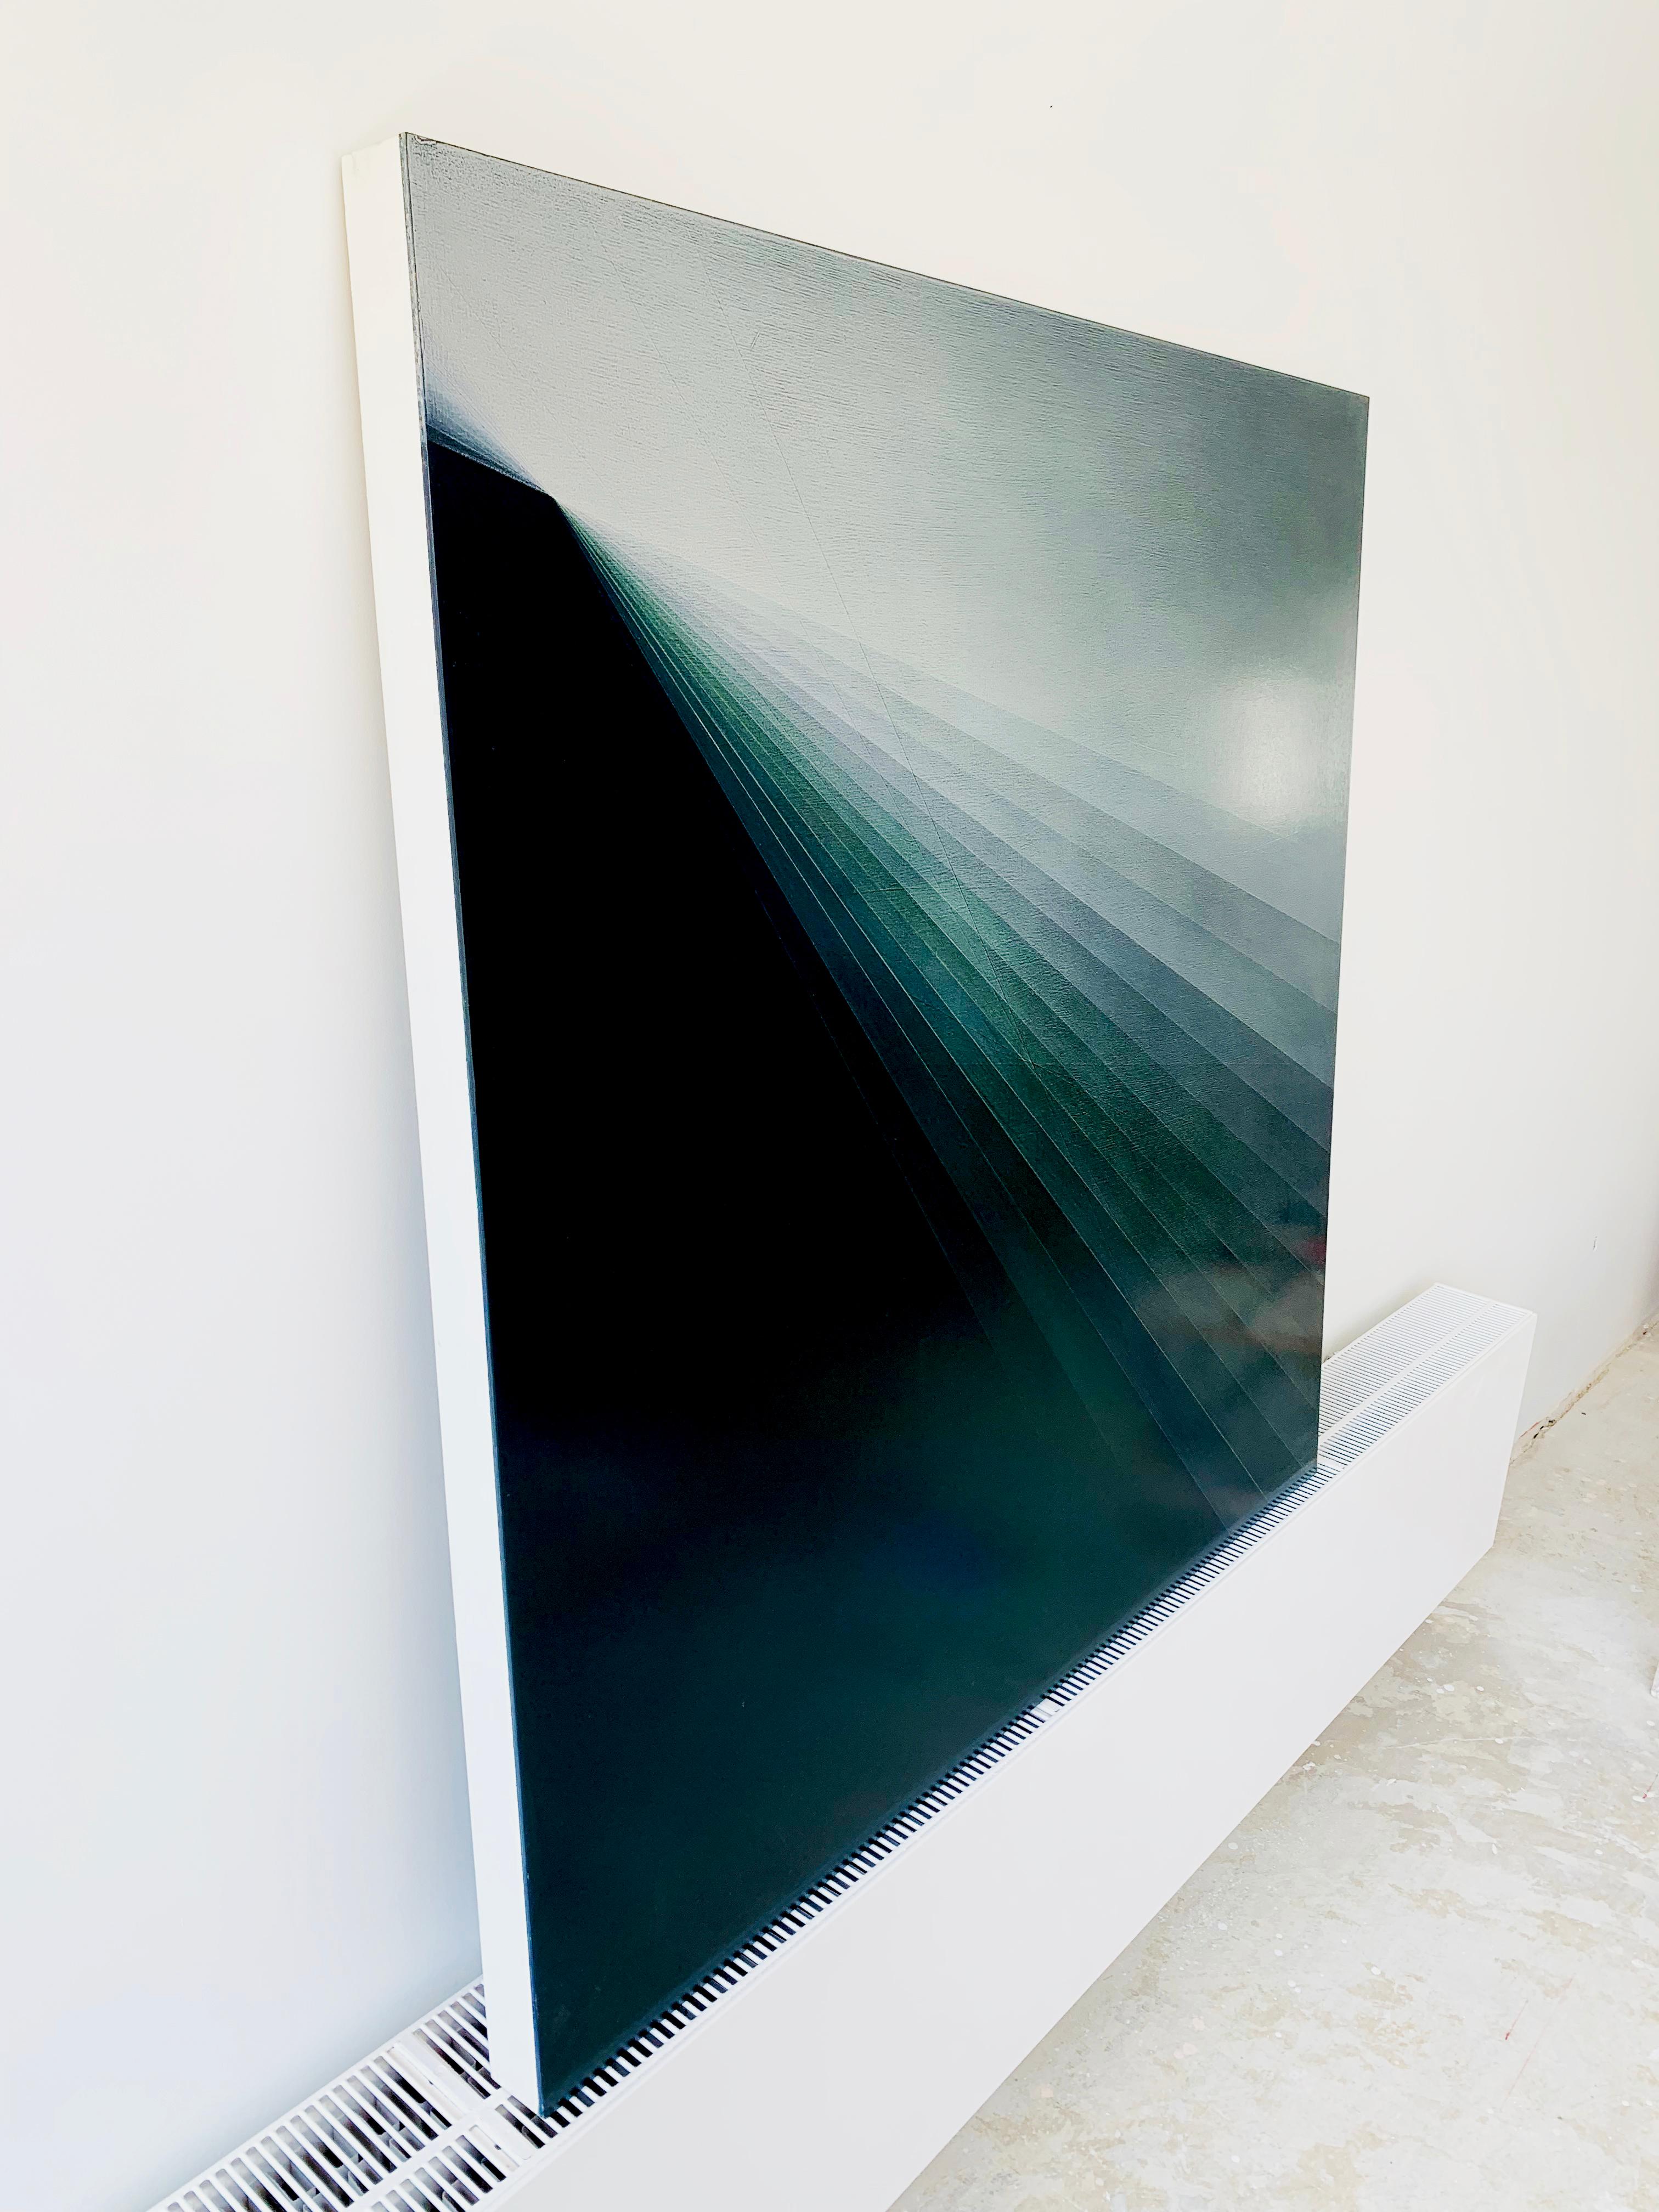 This abstract painting is highly reflective and depending on the light changes its color. Sometimes vividly green, sometimes a darker grey. 

At the heart of each of Frank’s paintings is the Japanese concept of Ma, which is the space or pause